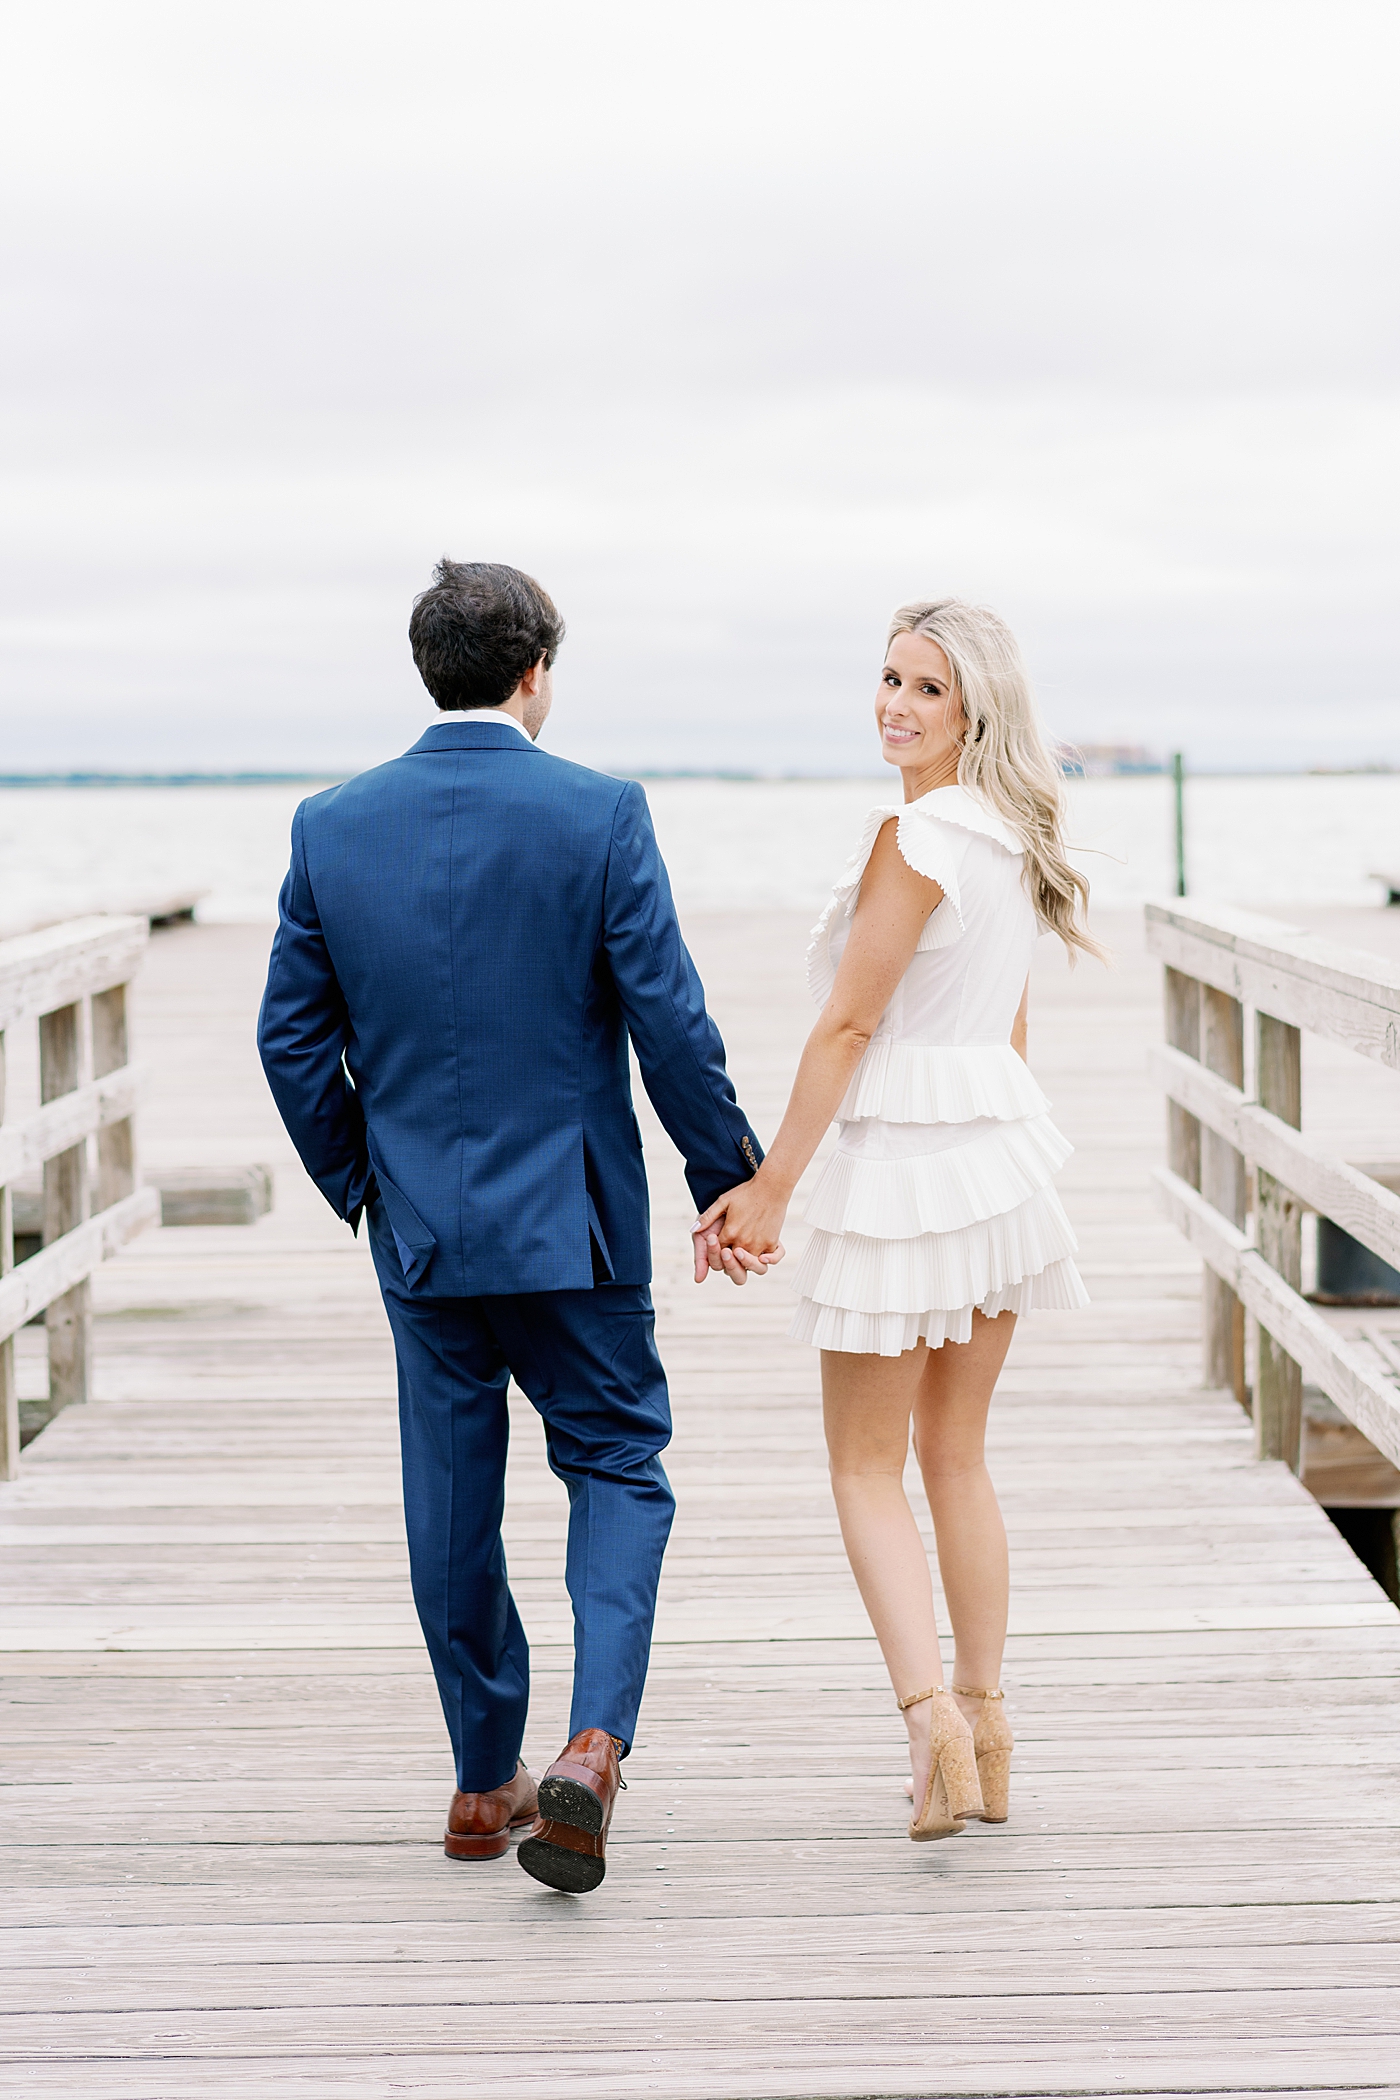 Couple walking on a pier holding hands | Image by Annie Laura Photo